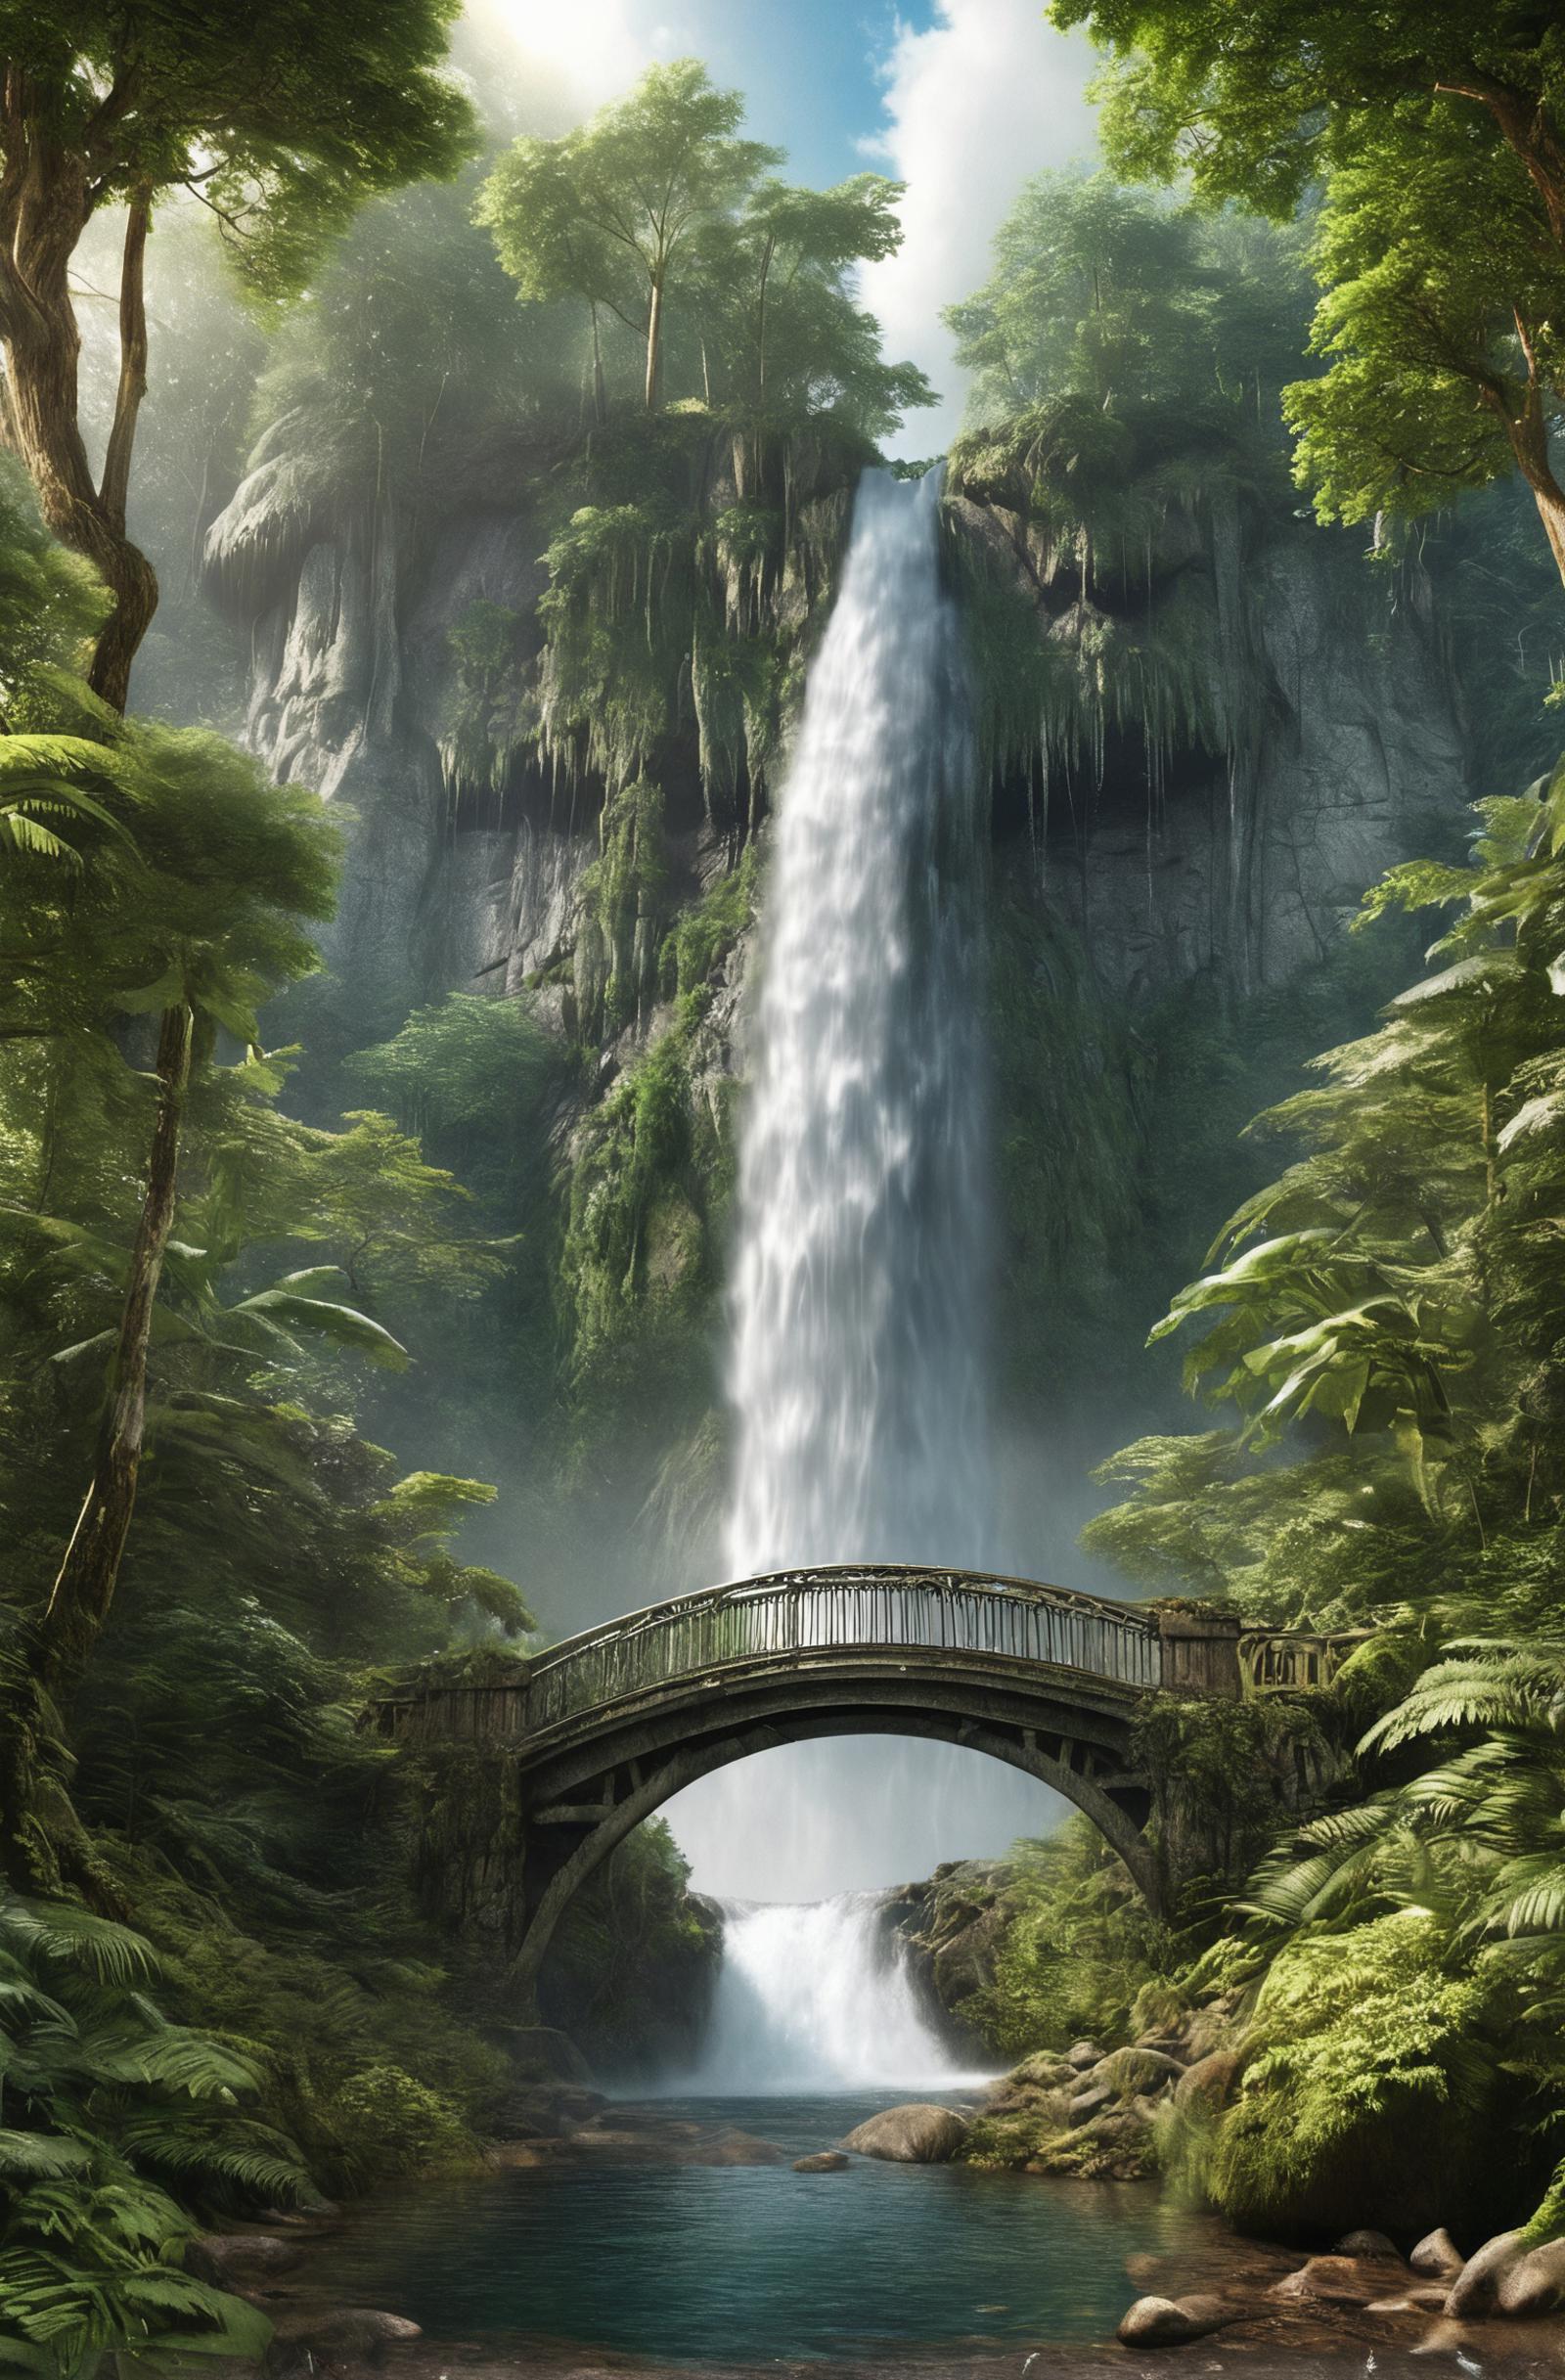 A bridge over a waterfall in a dense forest.